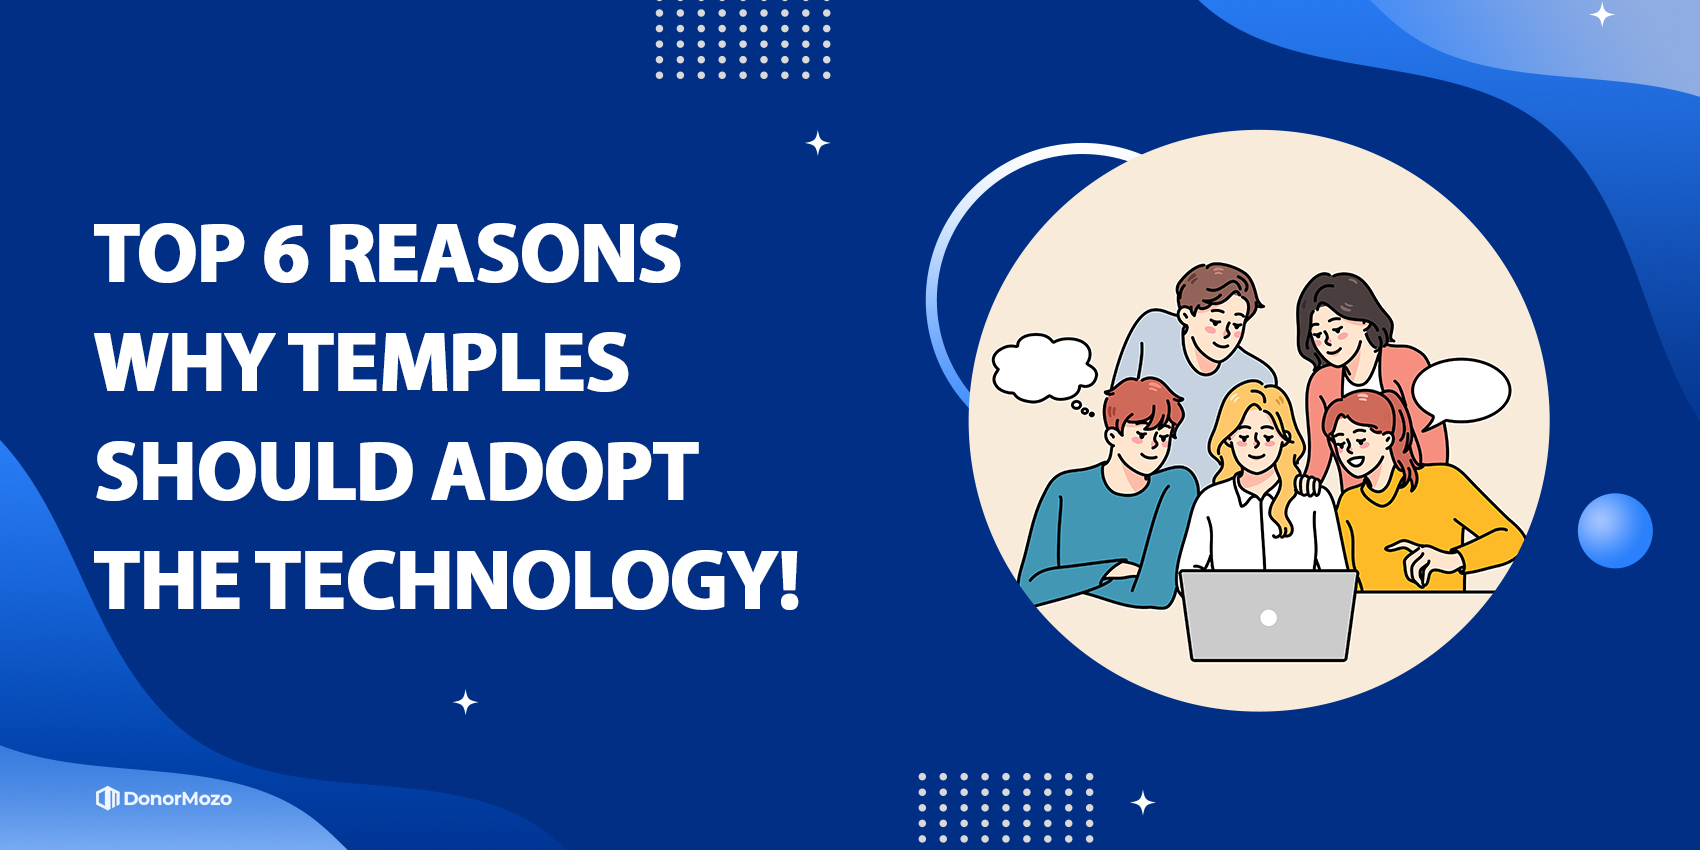 Top 6 Reasons Why Temples should Adopt the Technology!